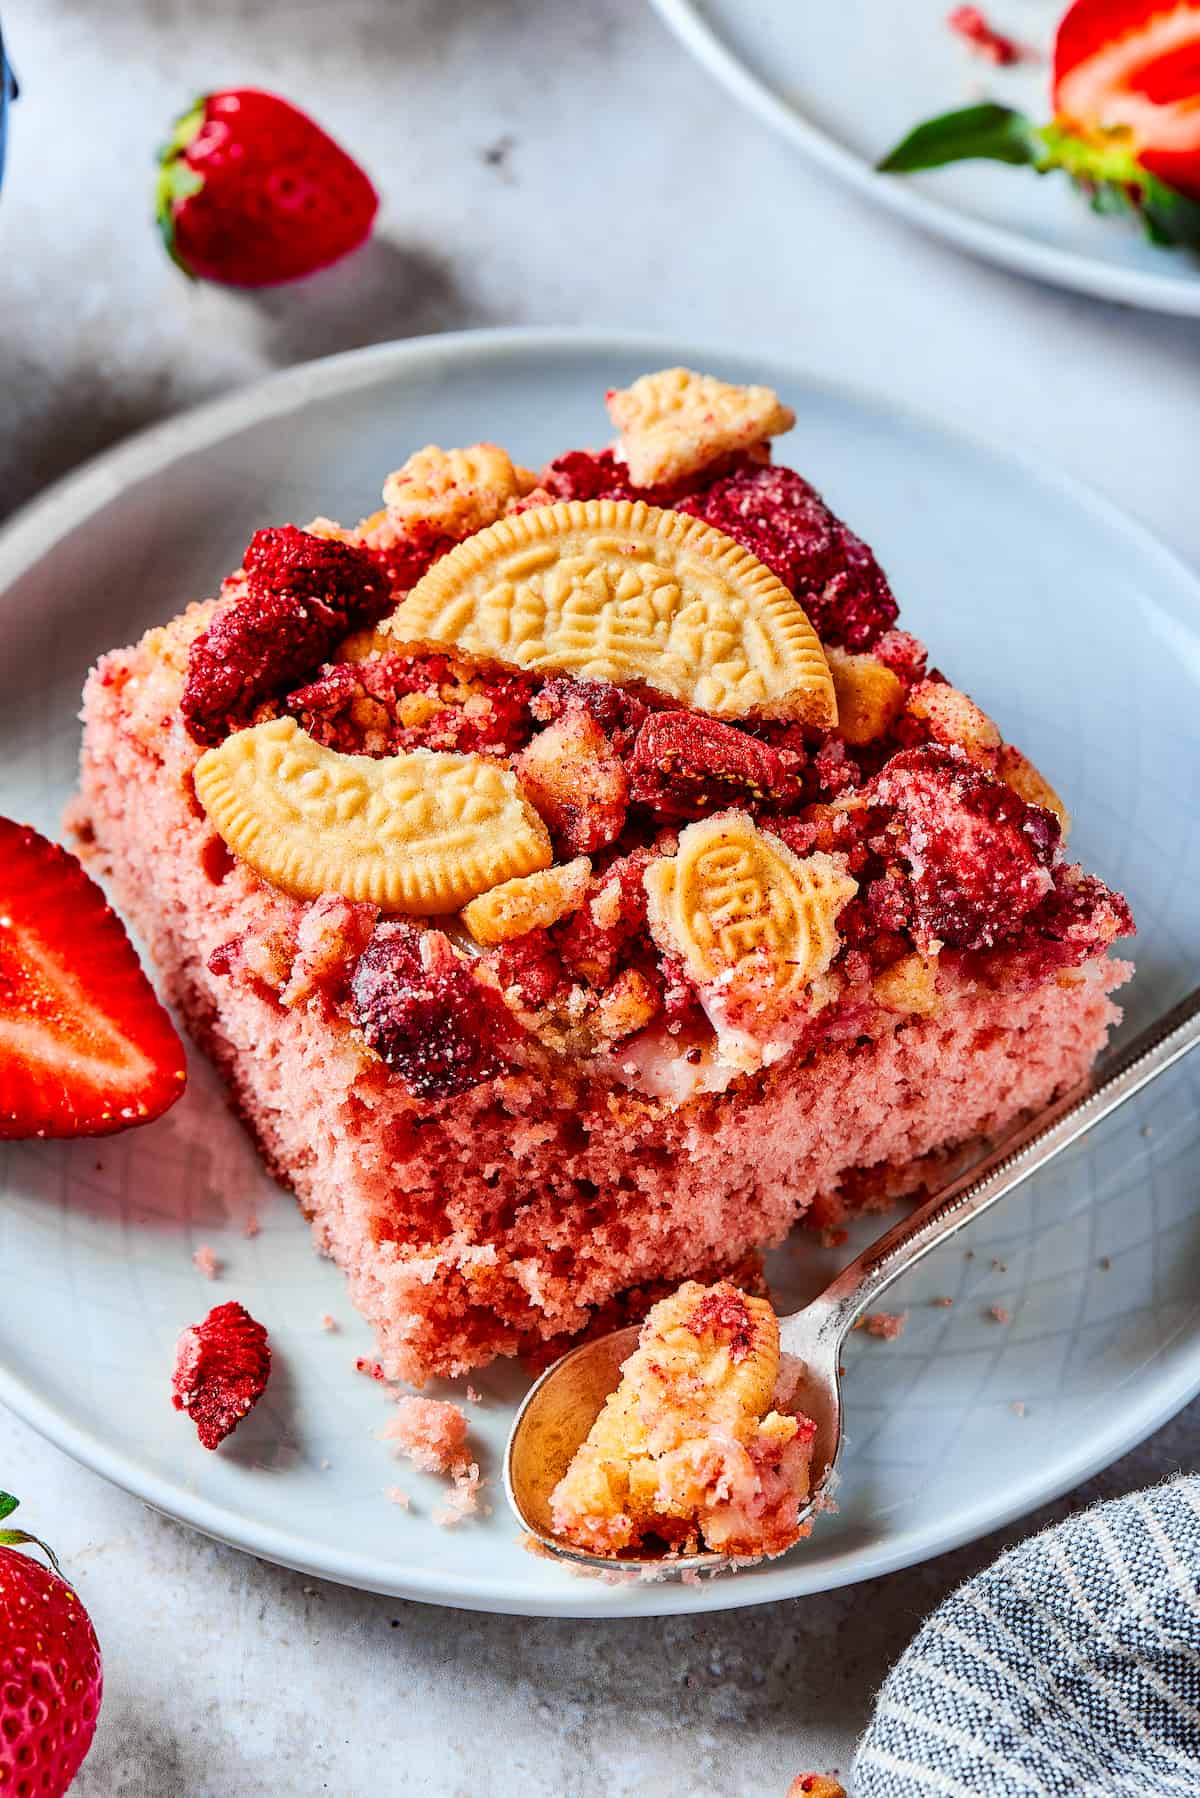 Pieces of strawberry crunch cake on plates with strawberries.